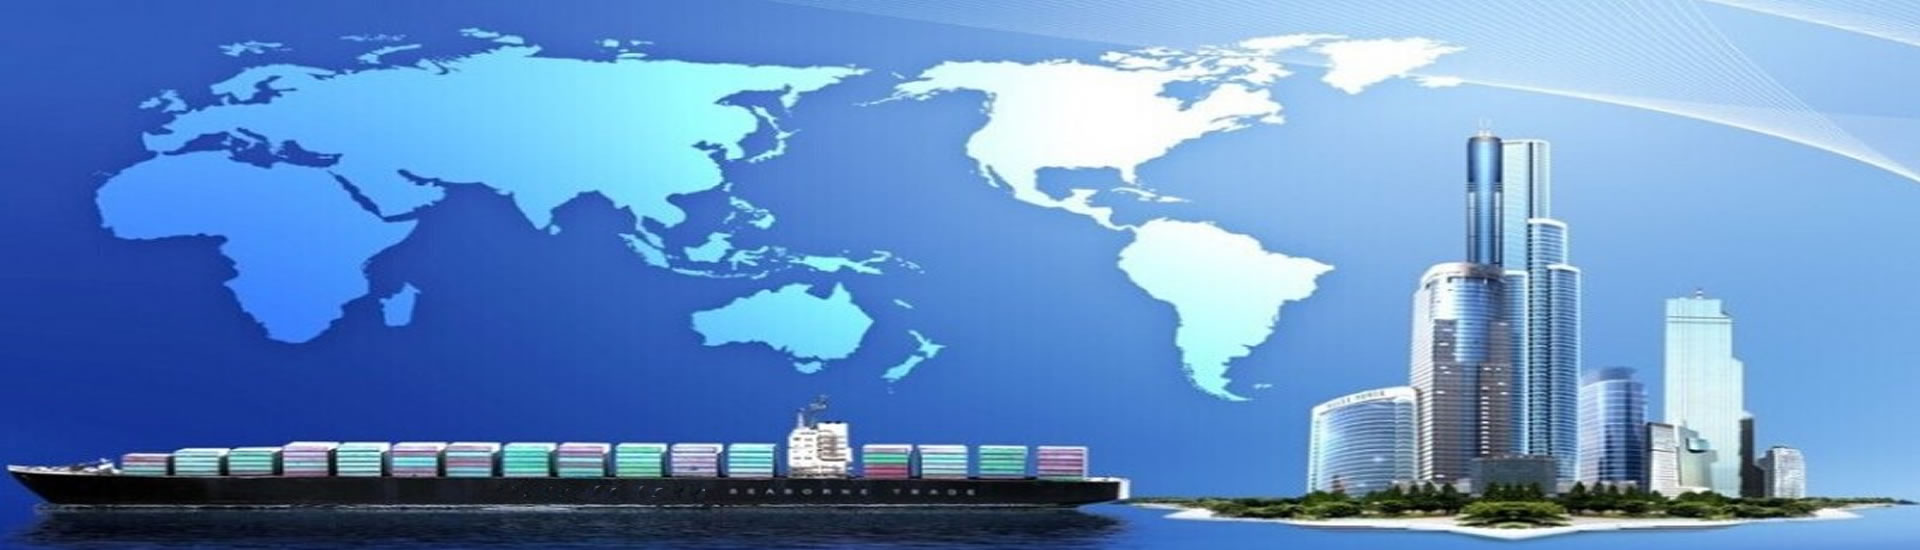 China-Vietnam Freight Transport, Vietnam-Russia and Central Asia Freight Transport